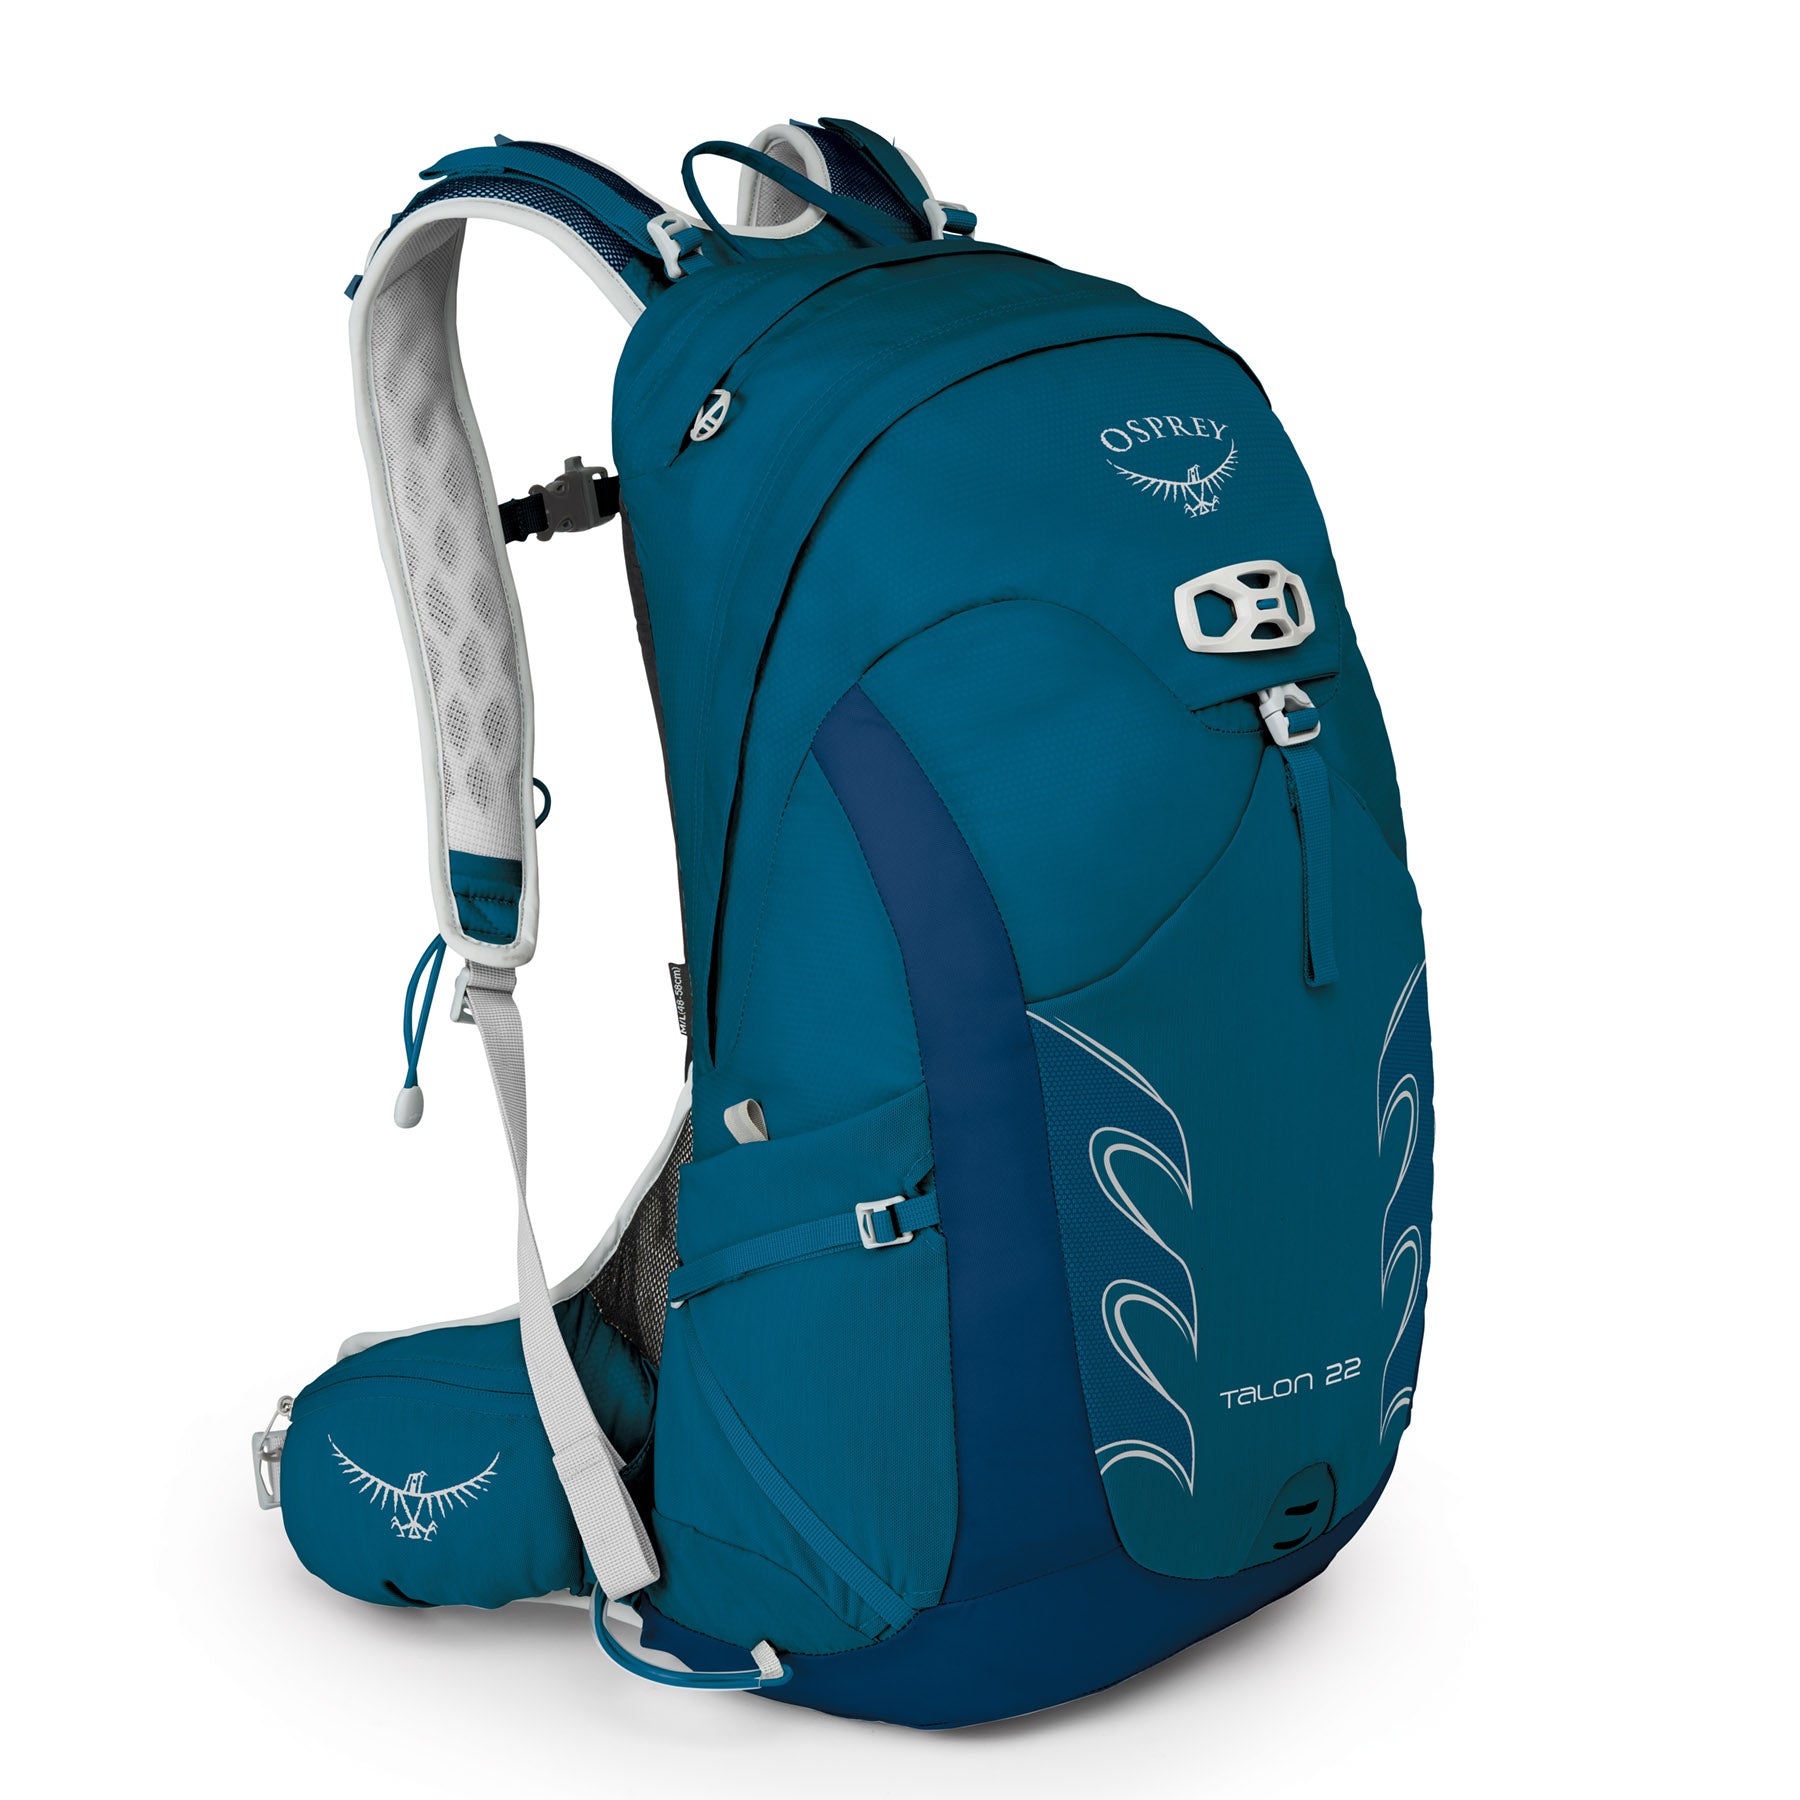 Men's Talon 22 Pack in Blue showing helmet holding clip, mesh water bottle side pockets, and a convenient mesh front pocket for quick-access items.